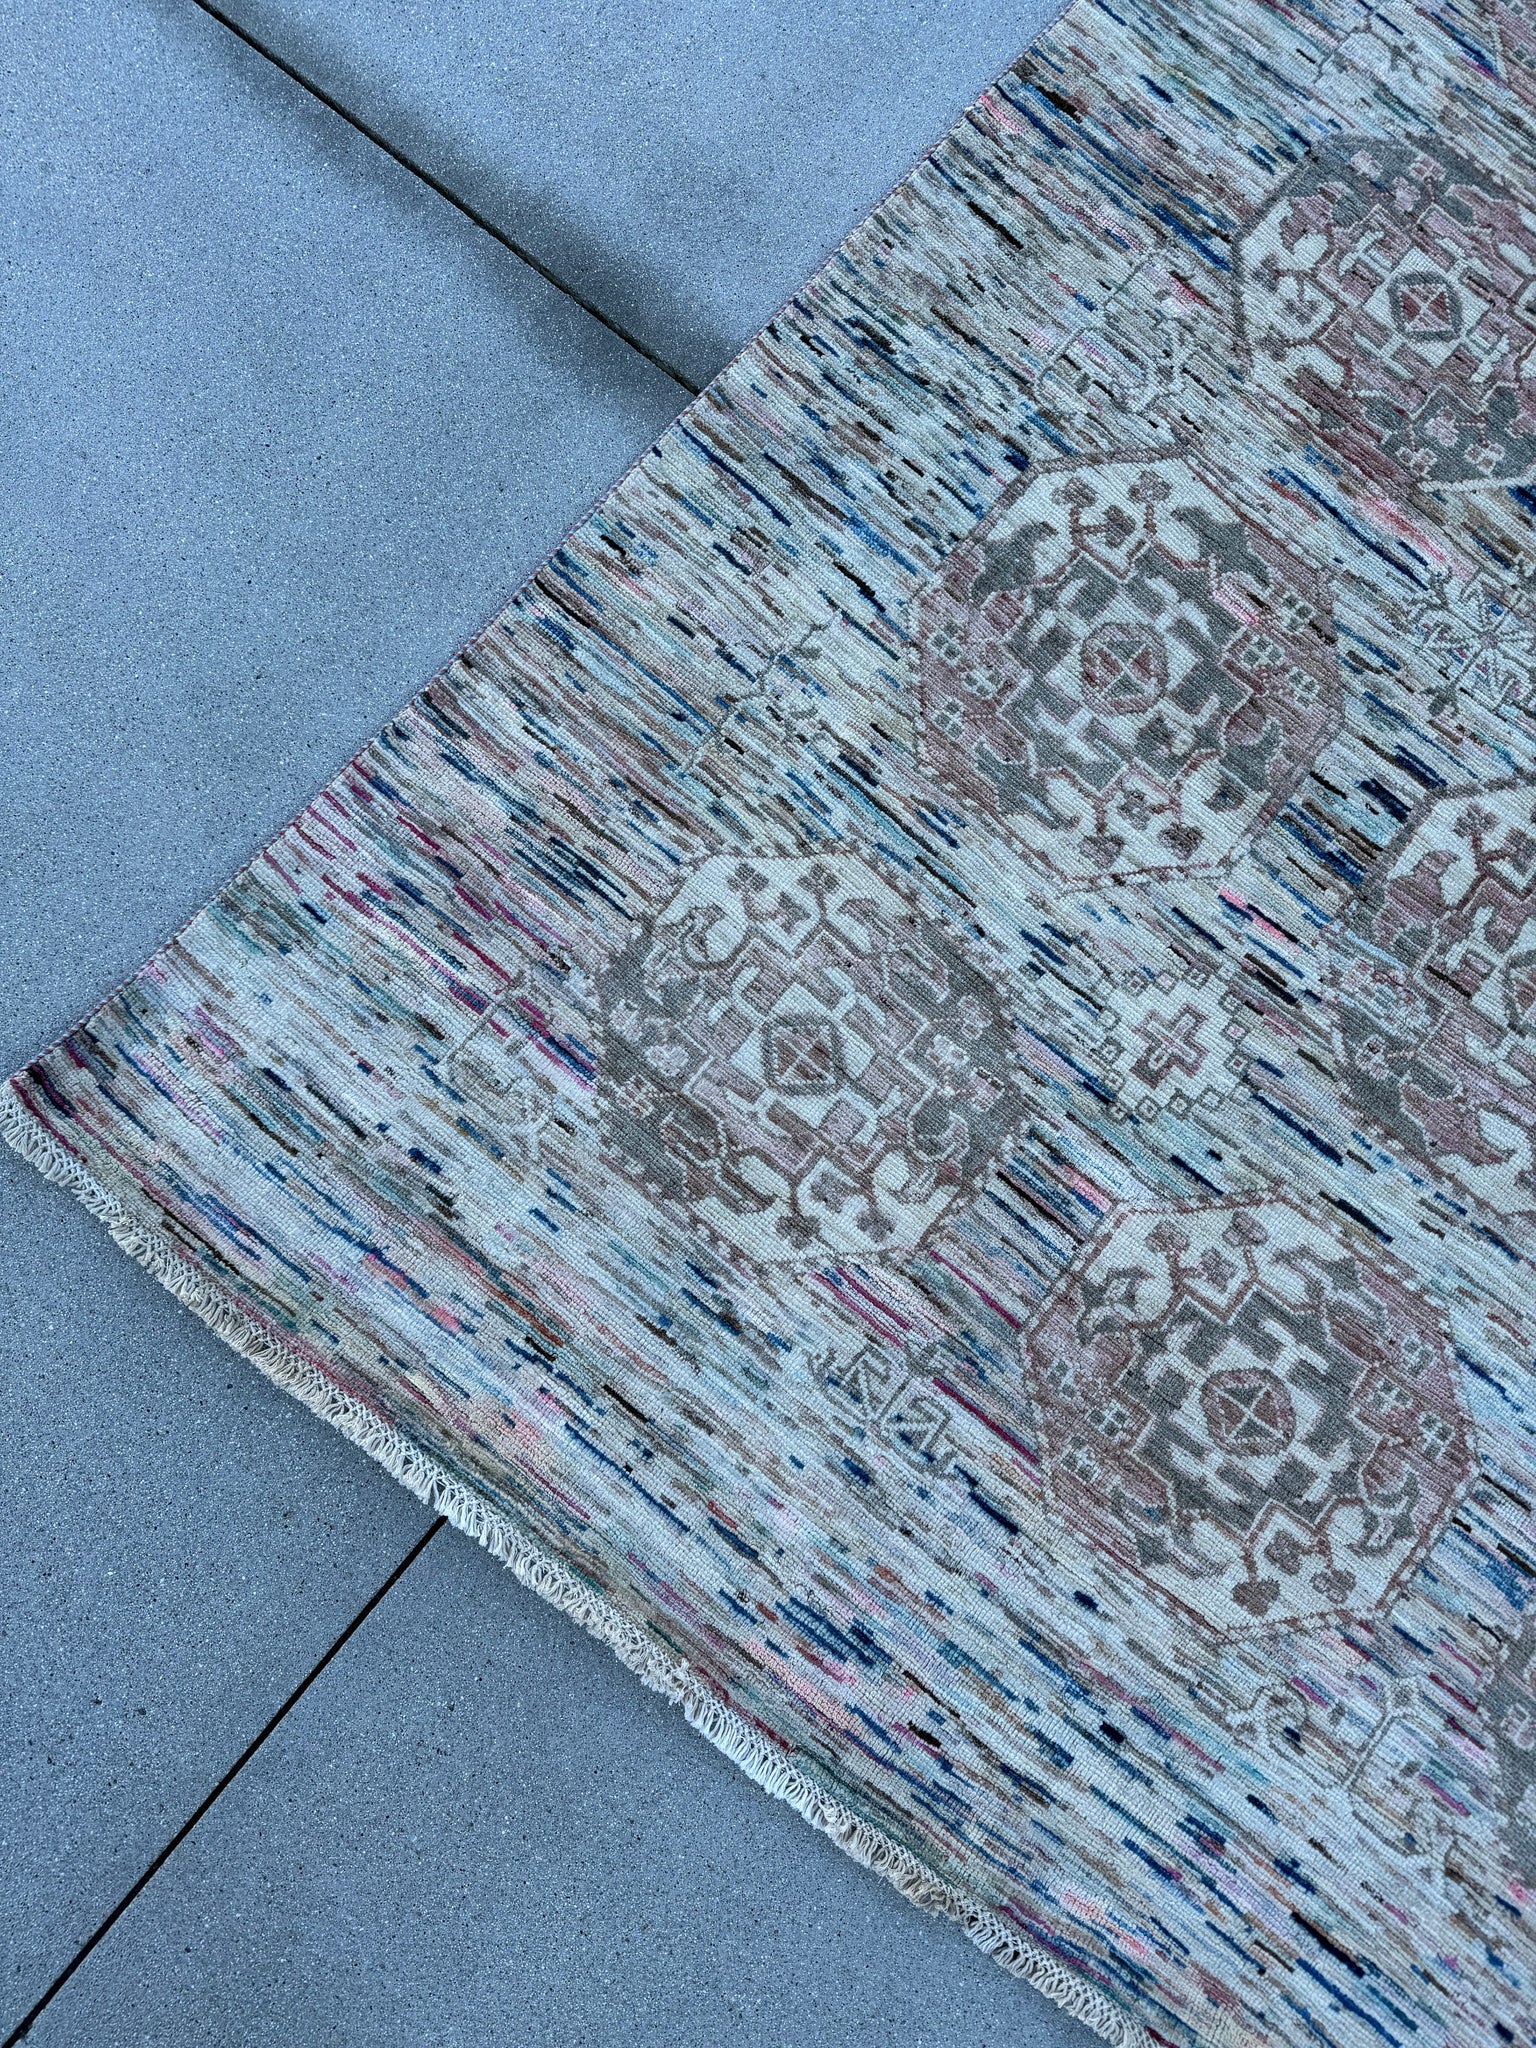 9x12 (270x360) Hand Knotted Afghan Rug | Charcoal Grey Coffee Ivory Blue Pink Light Red Black | Persian Subtle Classic Medallions